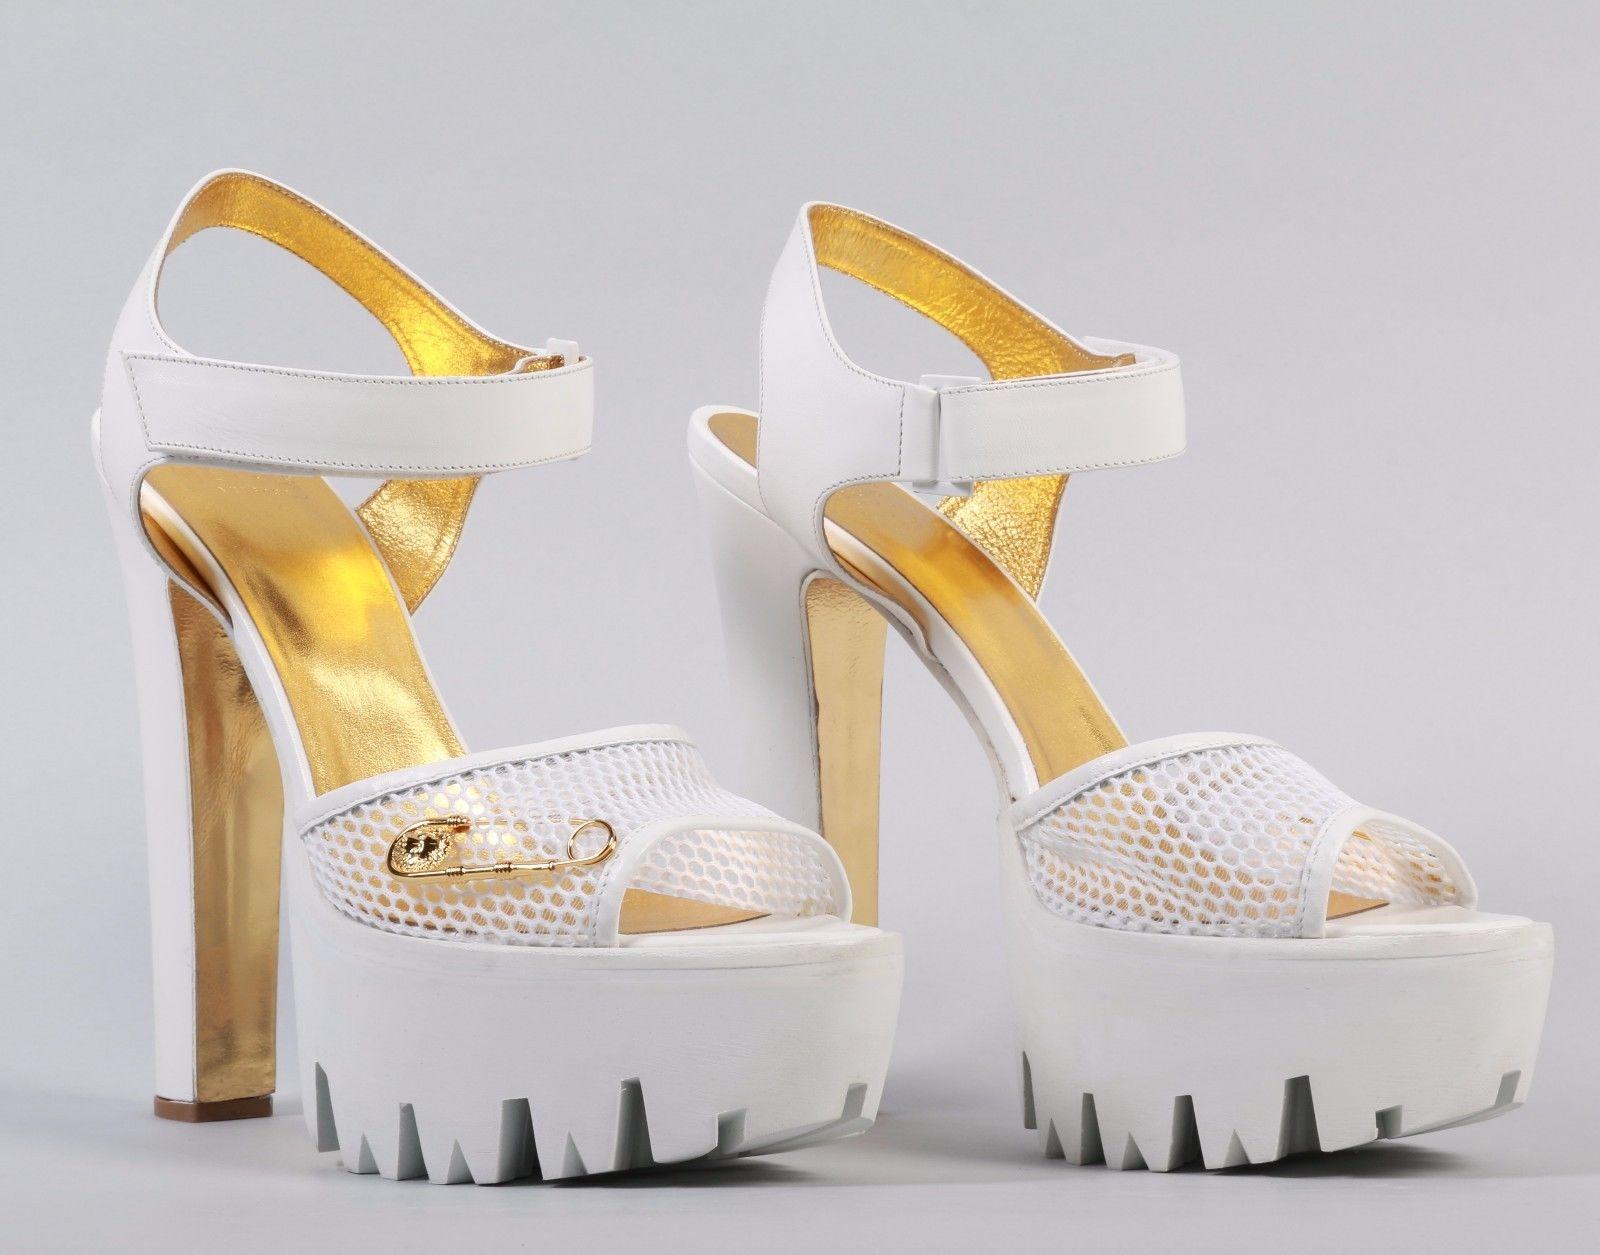 New Versace Versus + Anthony Vaccarello White Platform Sandals 40.5 - 10.5 In New Condition For Sale In Montgomery, TX